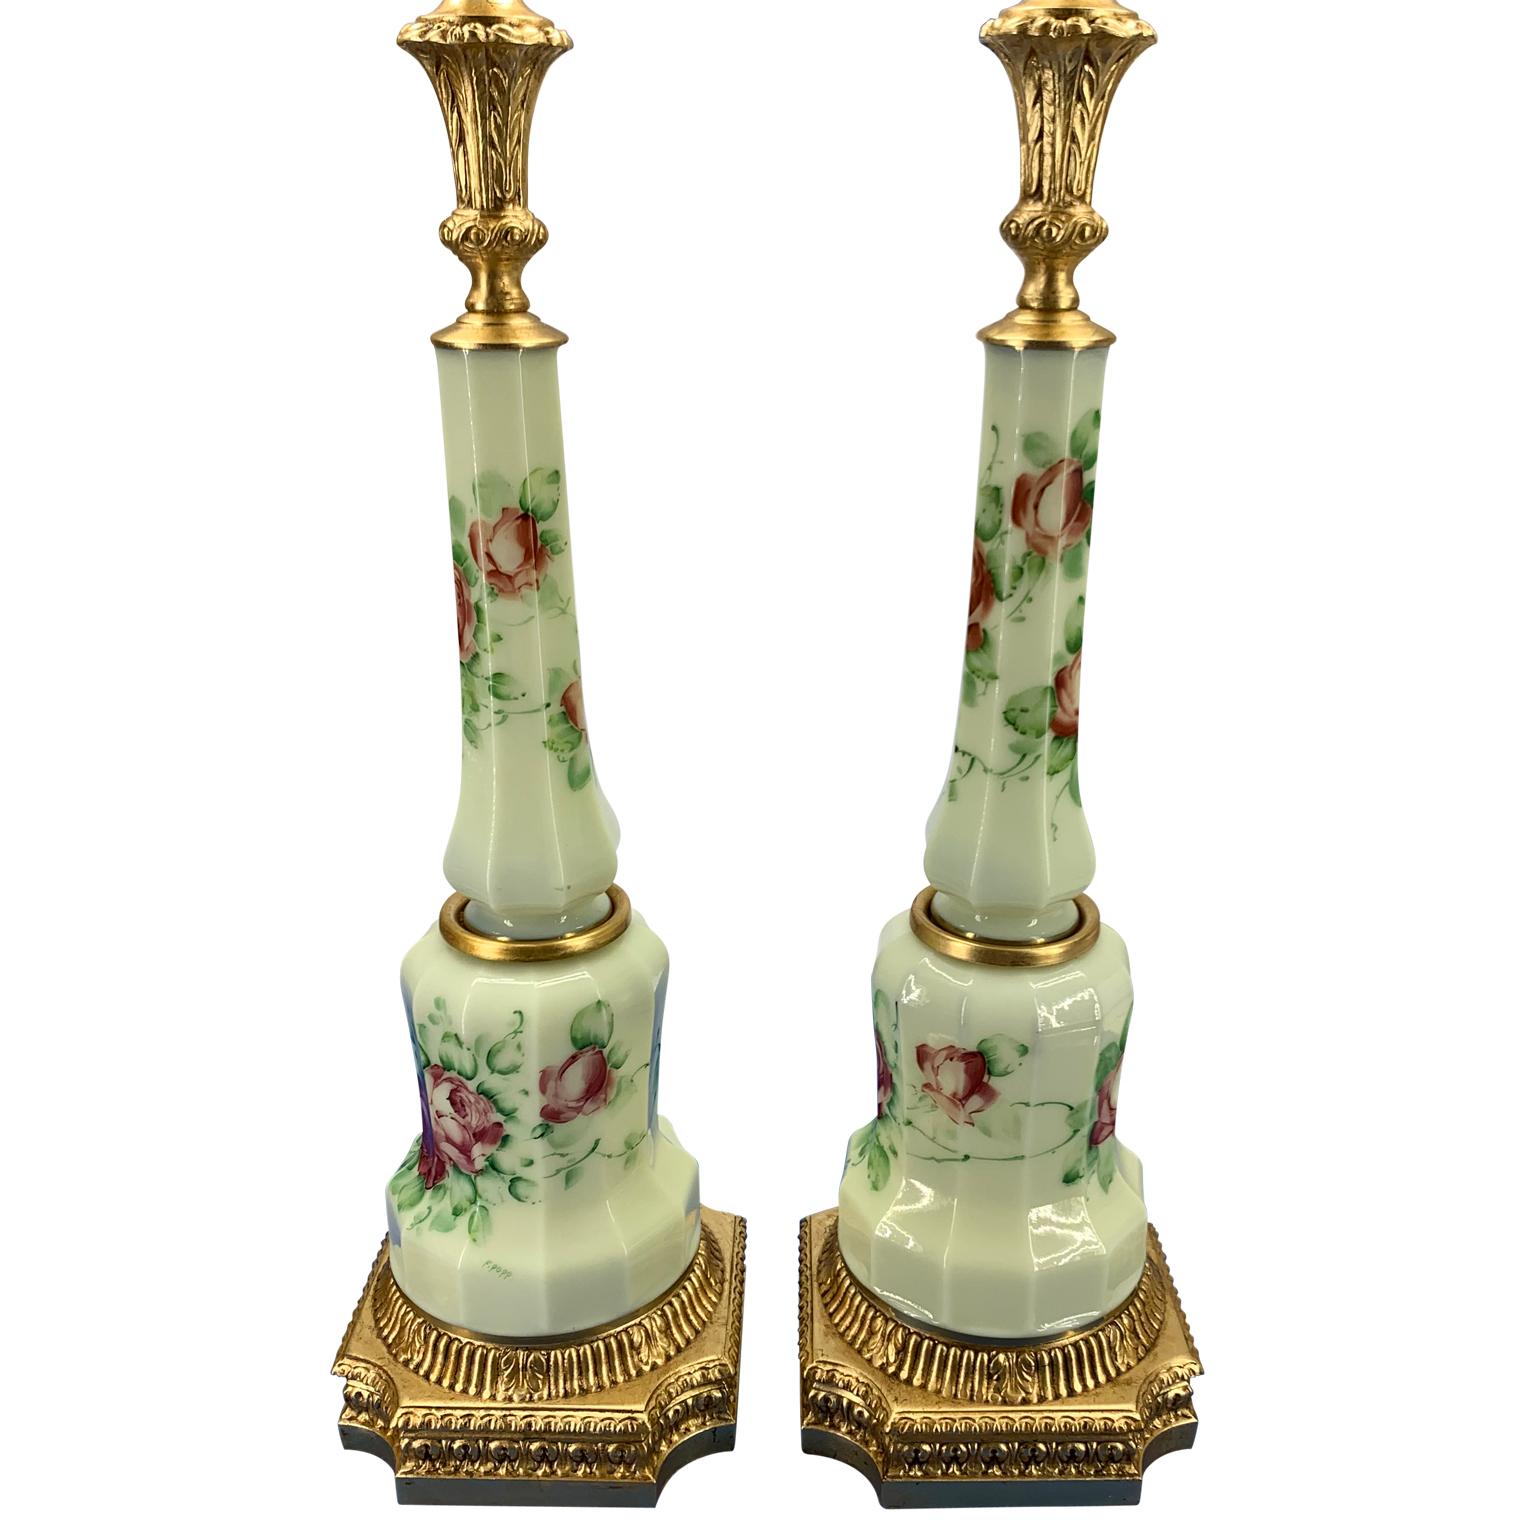 Pair of antique French faceted flower decorated and signed opaline table lamps
These are 19th century oil lamps converted it electrified table lamps.